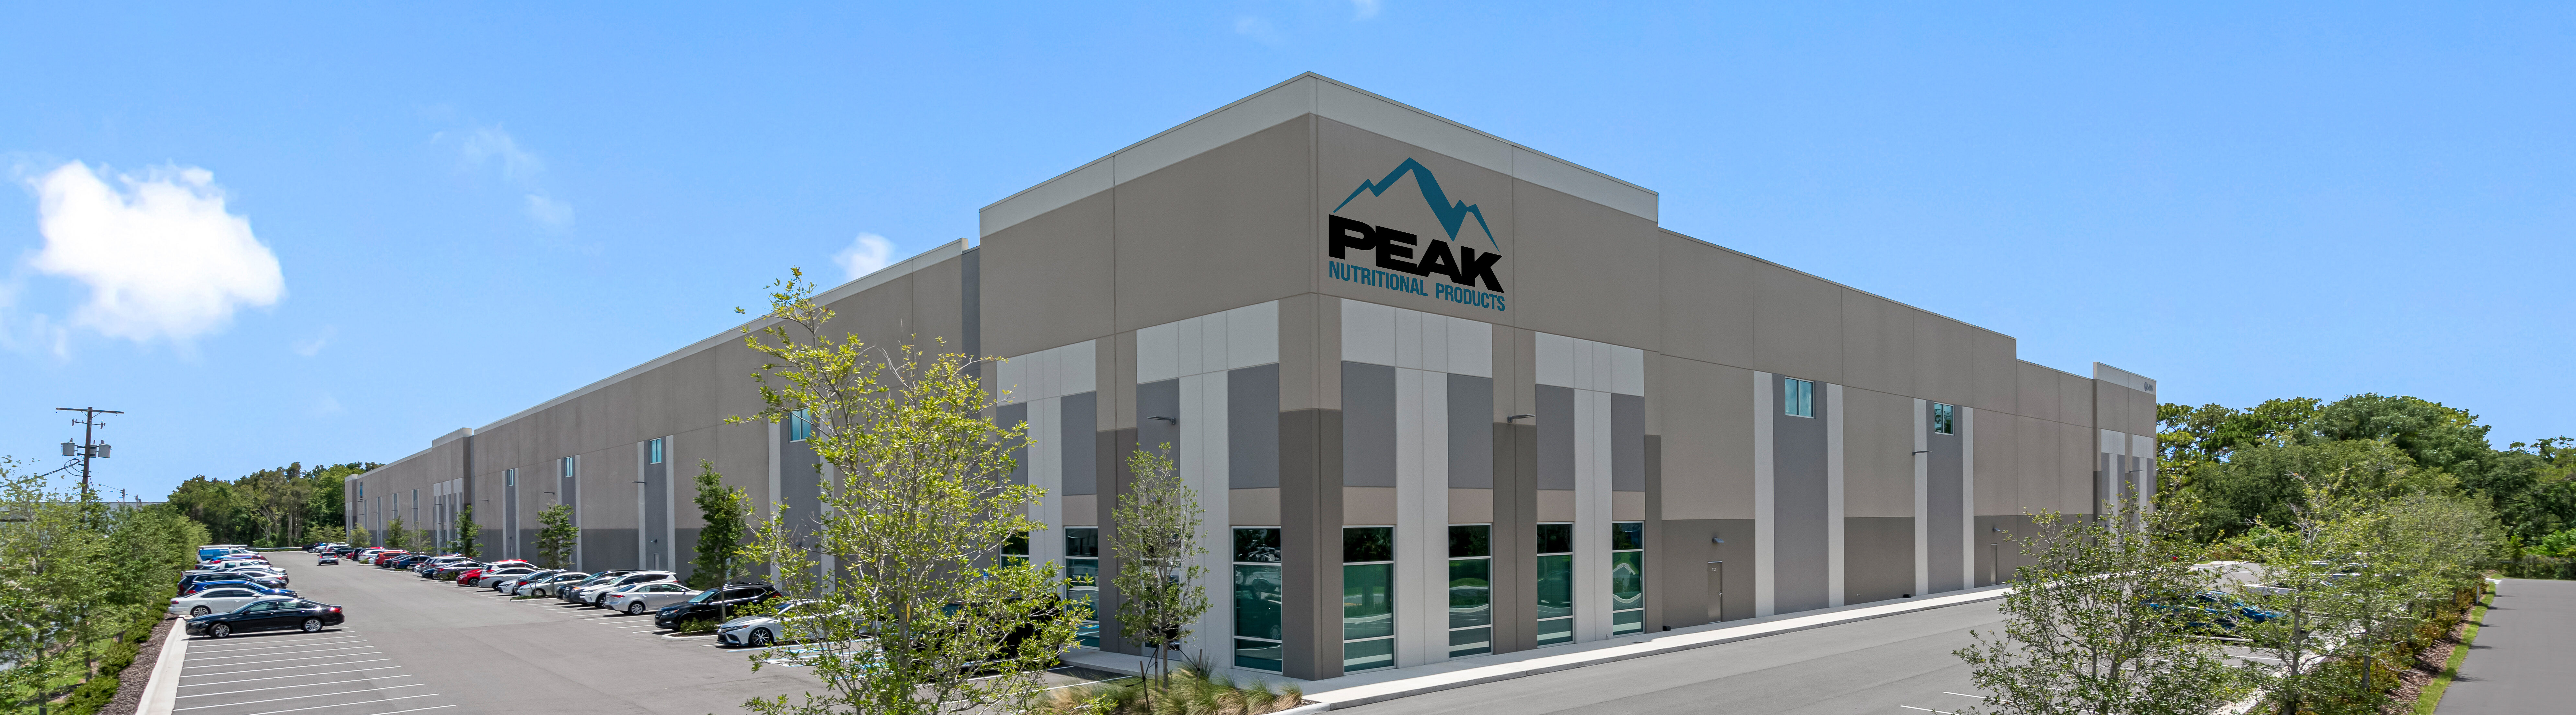 Image of the PEAK Nutraceutical Plant